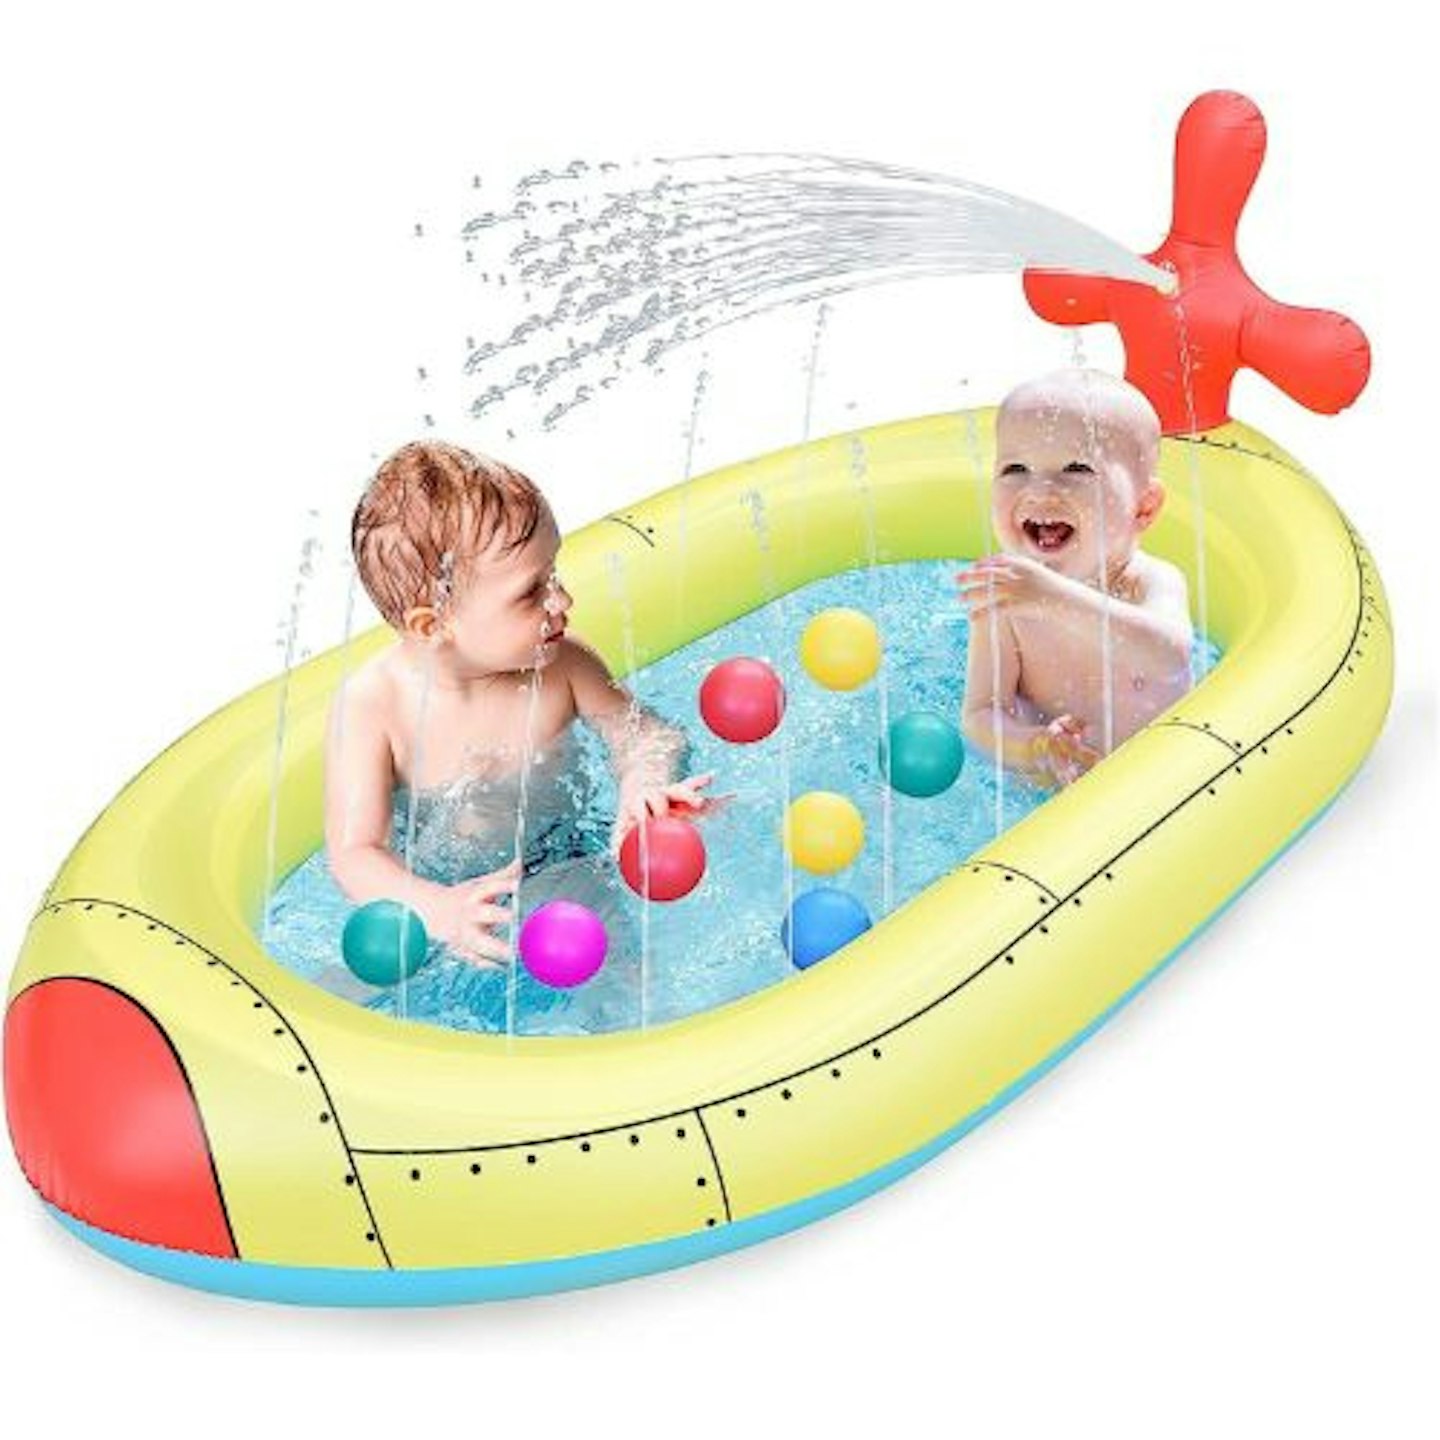 Paddling Pools And Pads : BAKAM Inflatable Swimming Pool for Toddlers